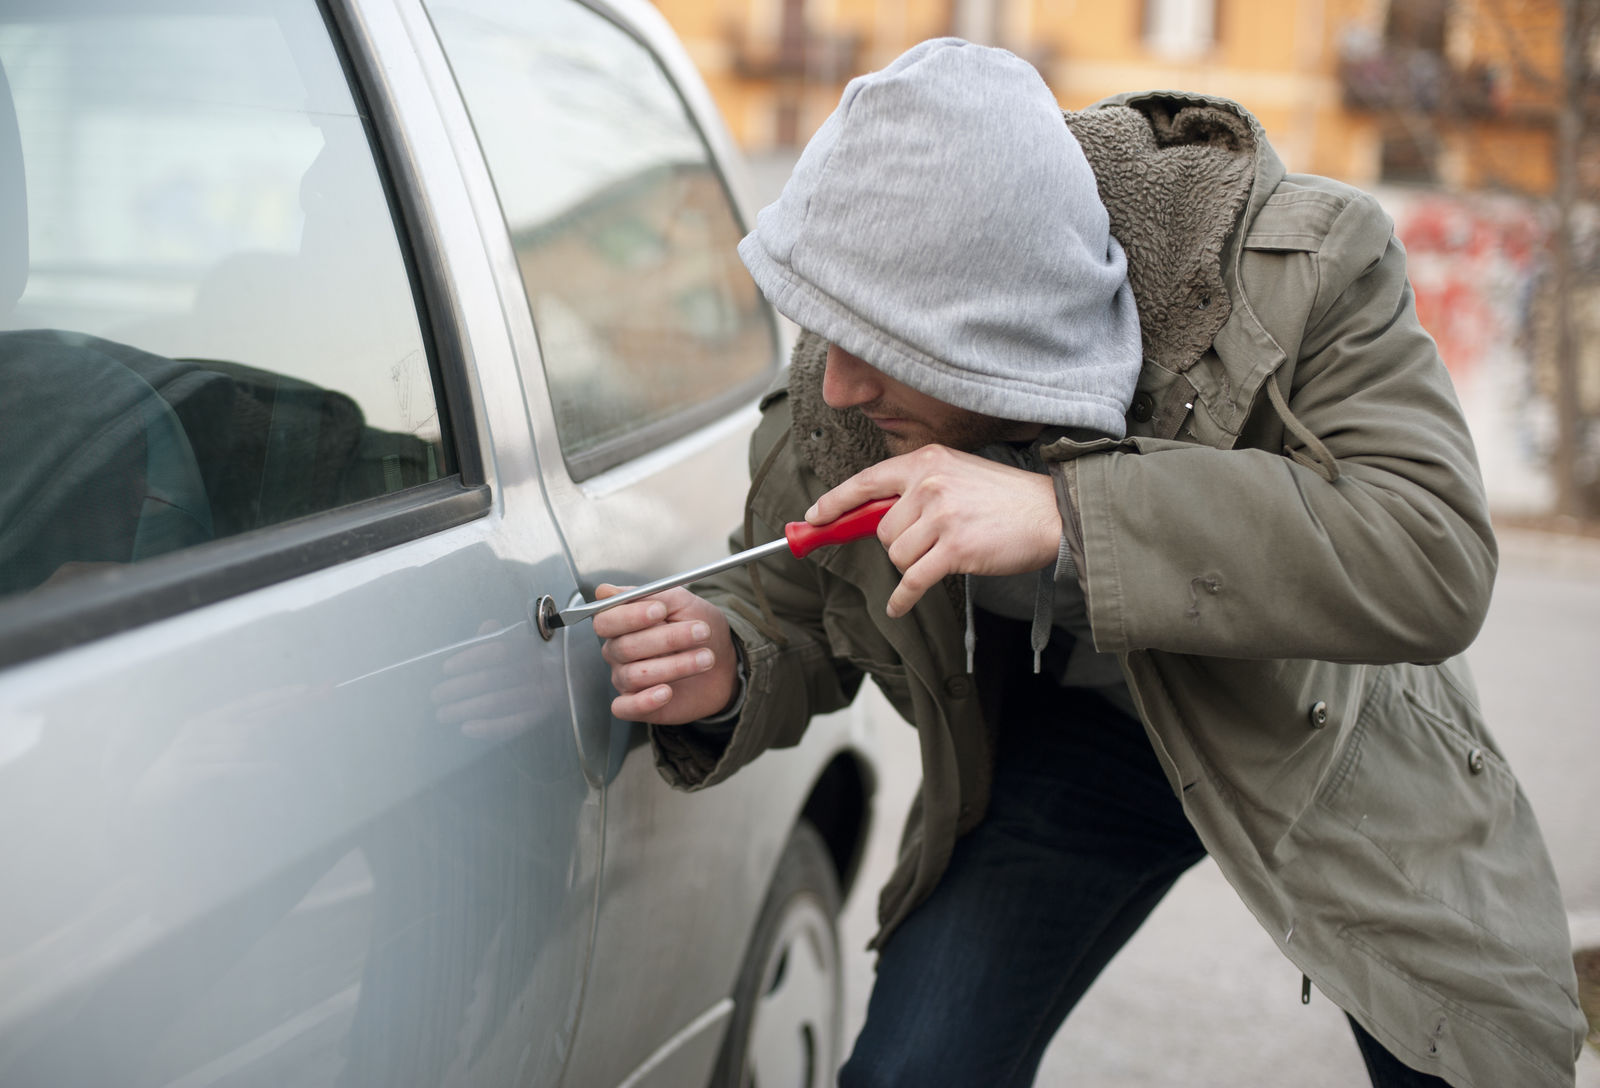 Are items stolen from your car covered by insurance?